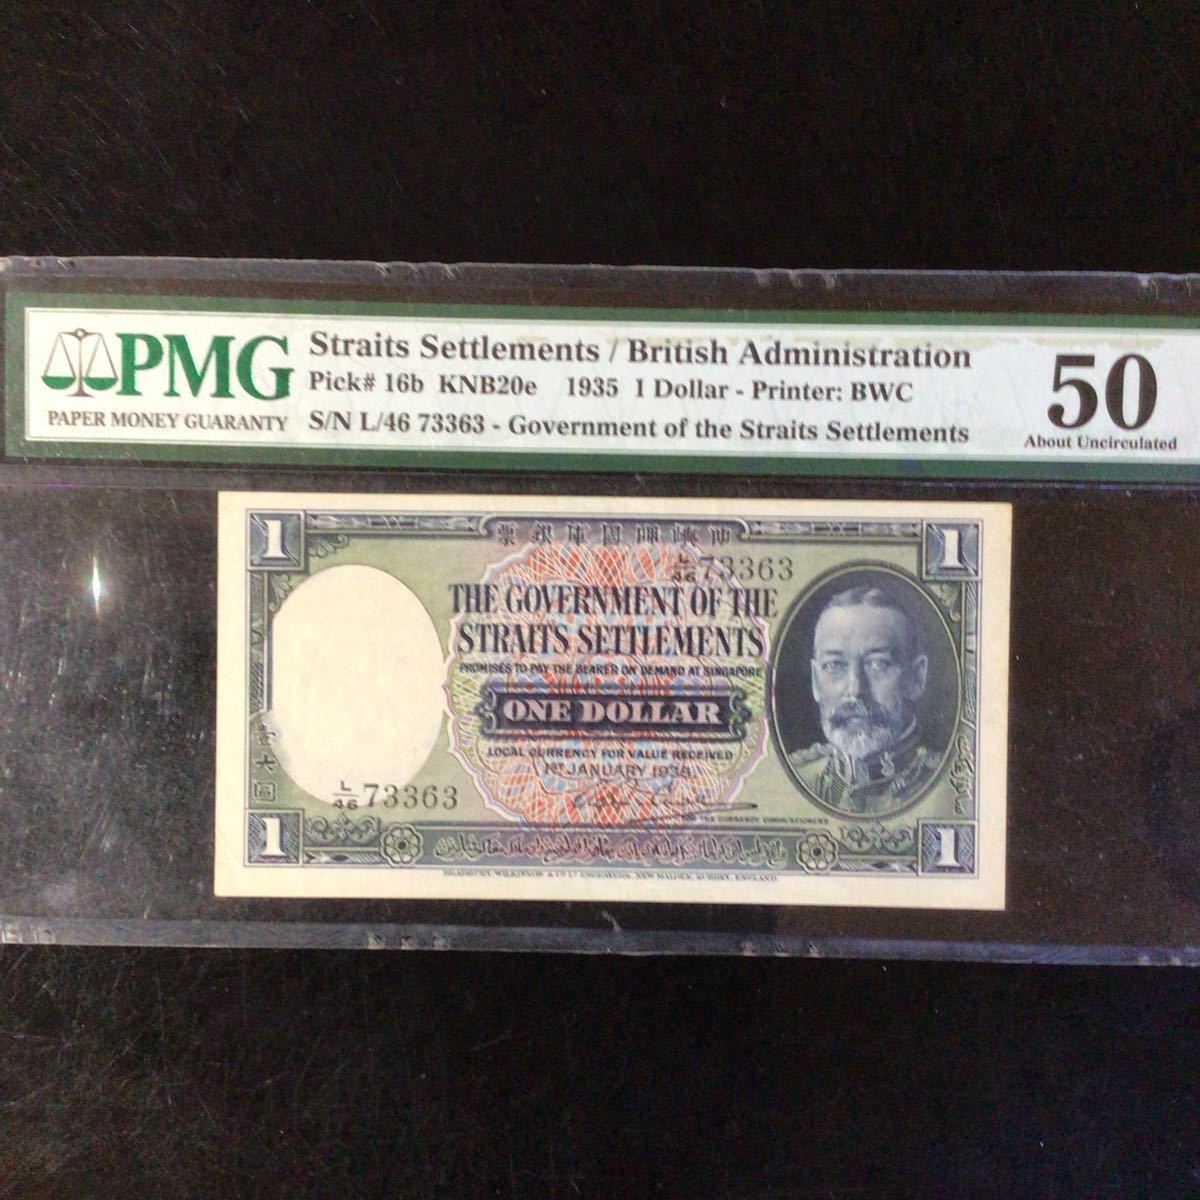 World Banknote Grading STRAITS SETTLEMENTS《British Administration》1 Dollar【1935】『PMG Grading About Uncirculated 50』